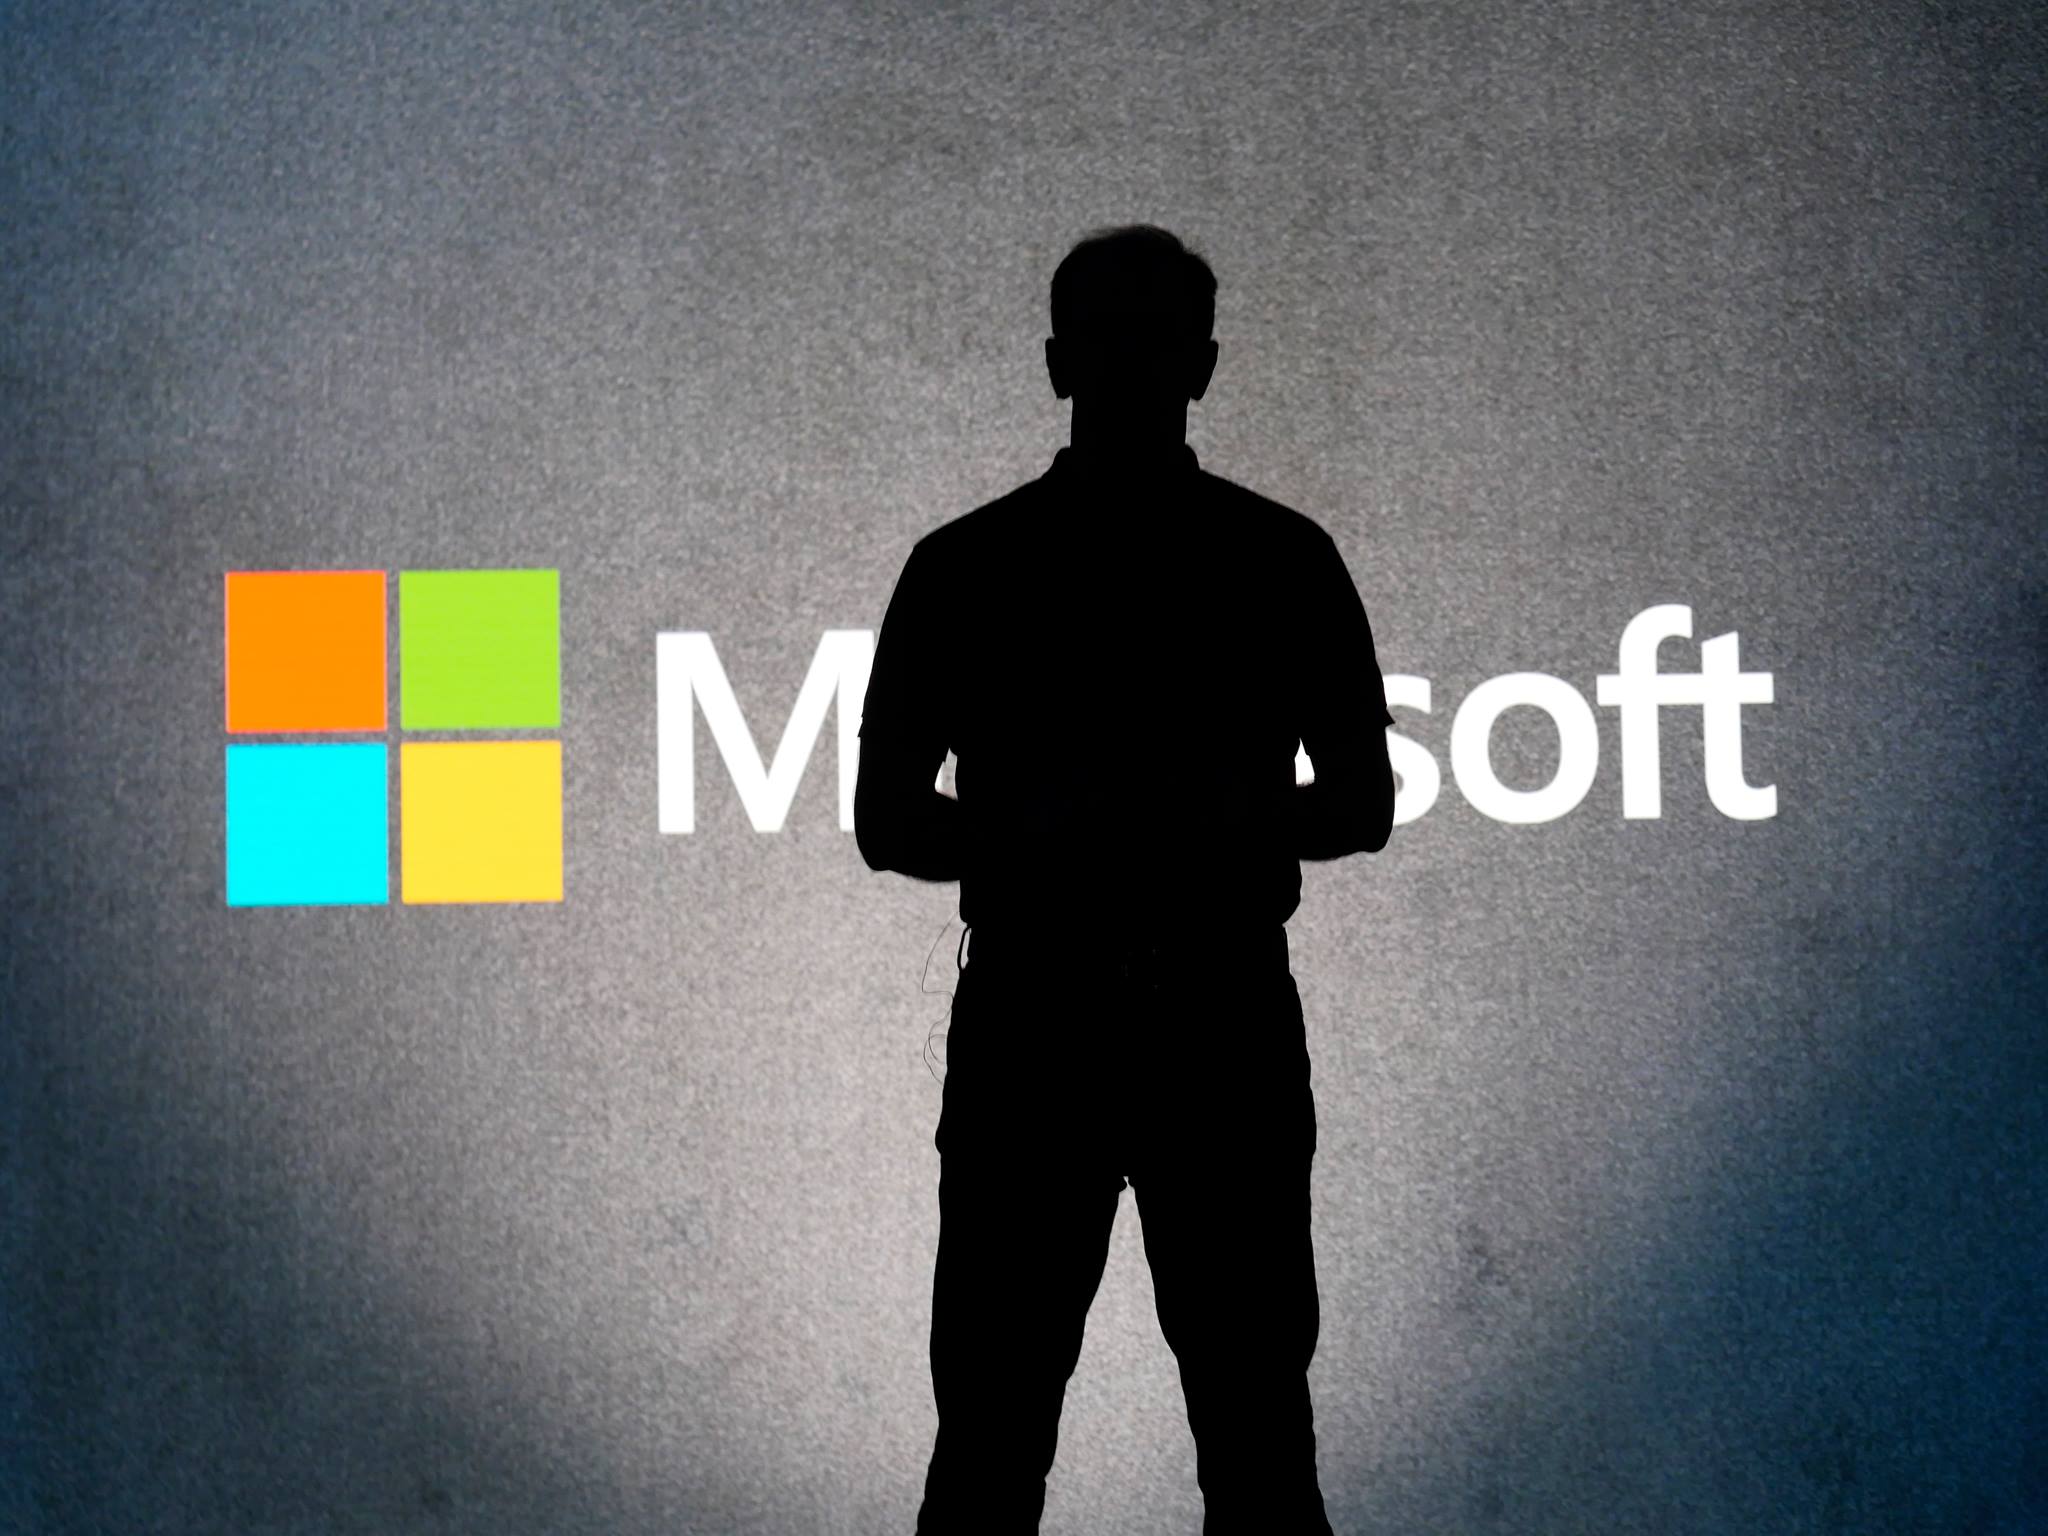 Microsoft Expects Double-Digit Growth for This Year as Demand for Cloud Computing Services Rise